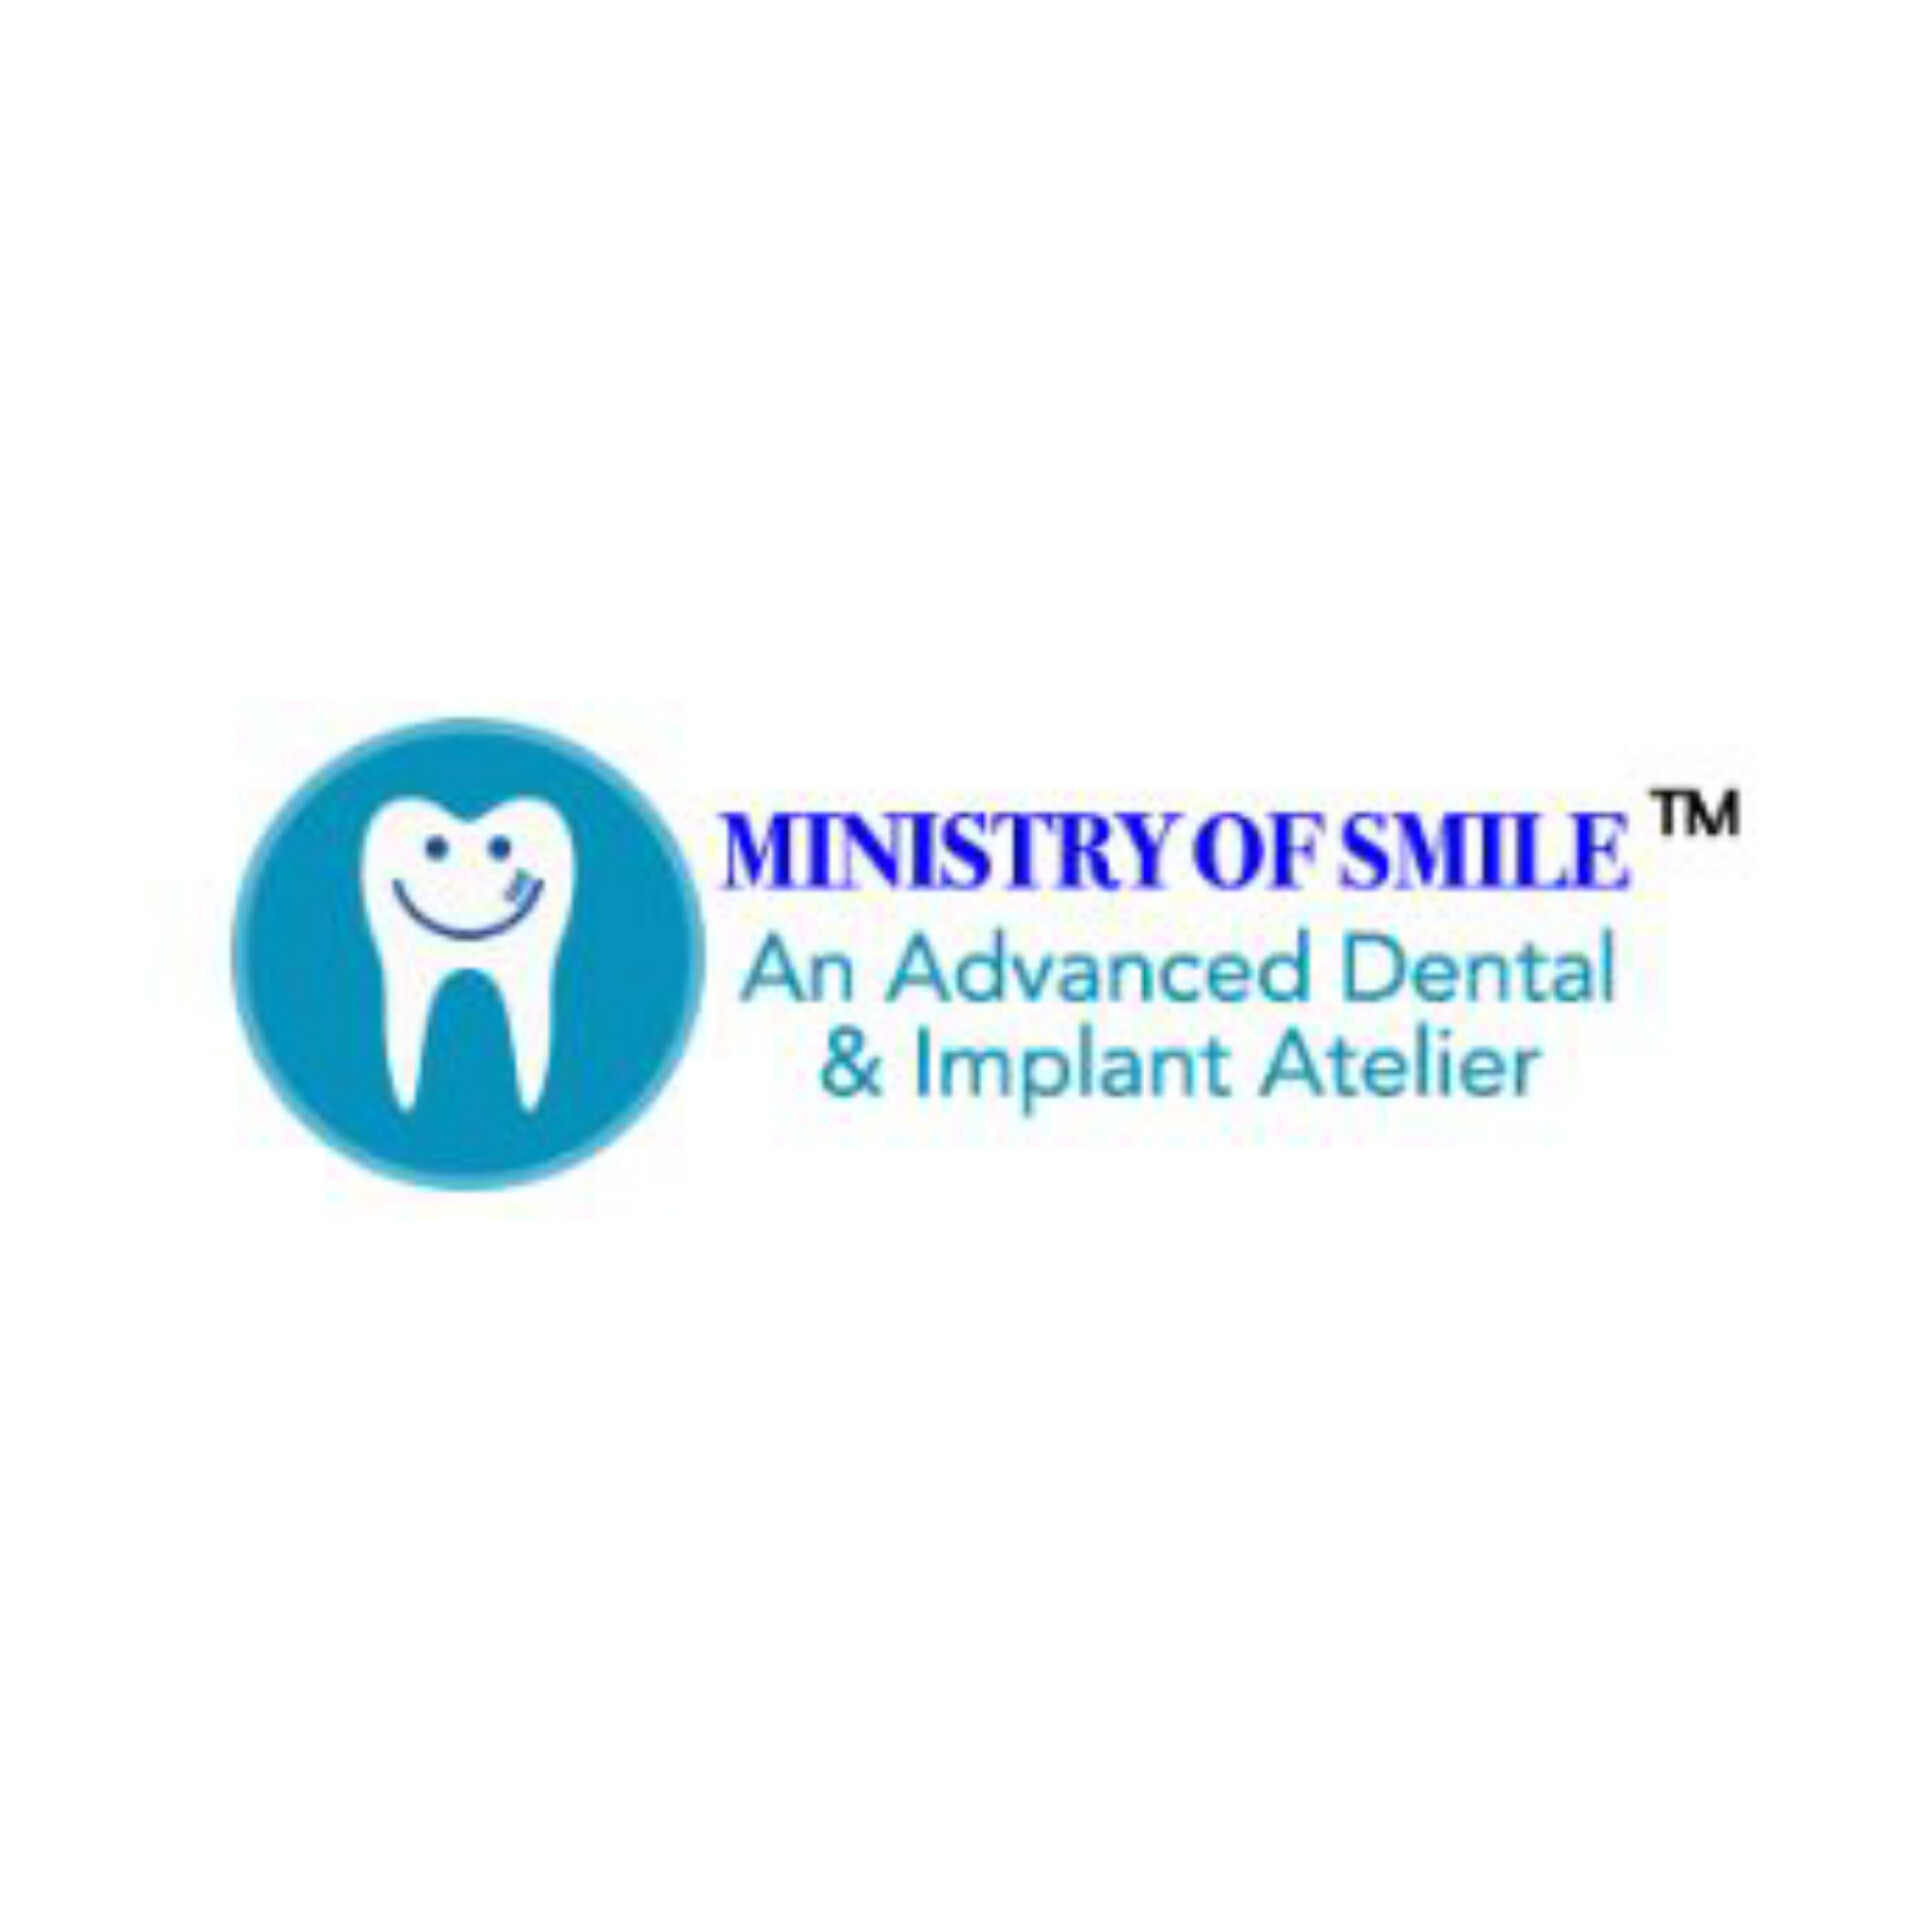 Ministry of Smile|Clinics|Medical Services